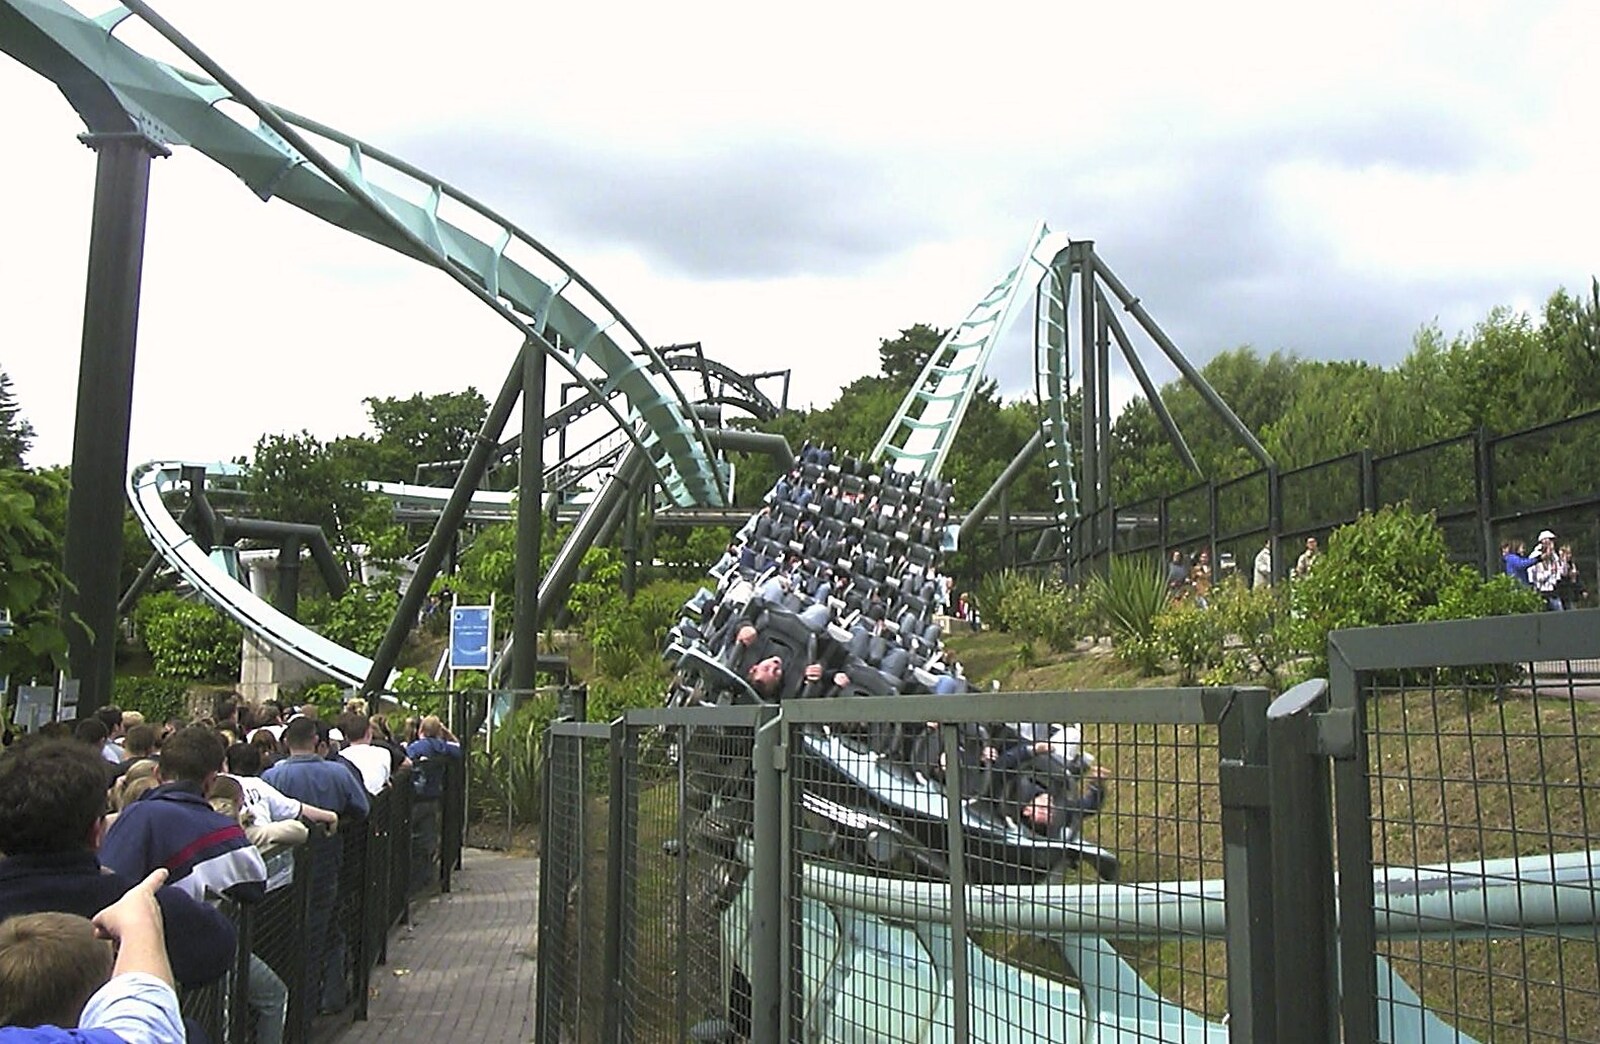 The Air rollercoaster comes around from A Trip to Alton Towers, Staffordshire - 19th June 2004